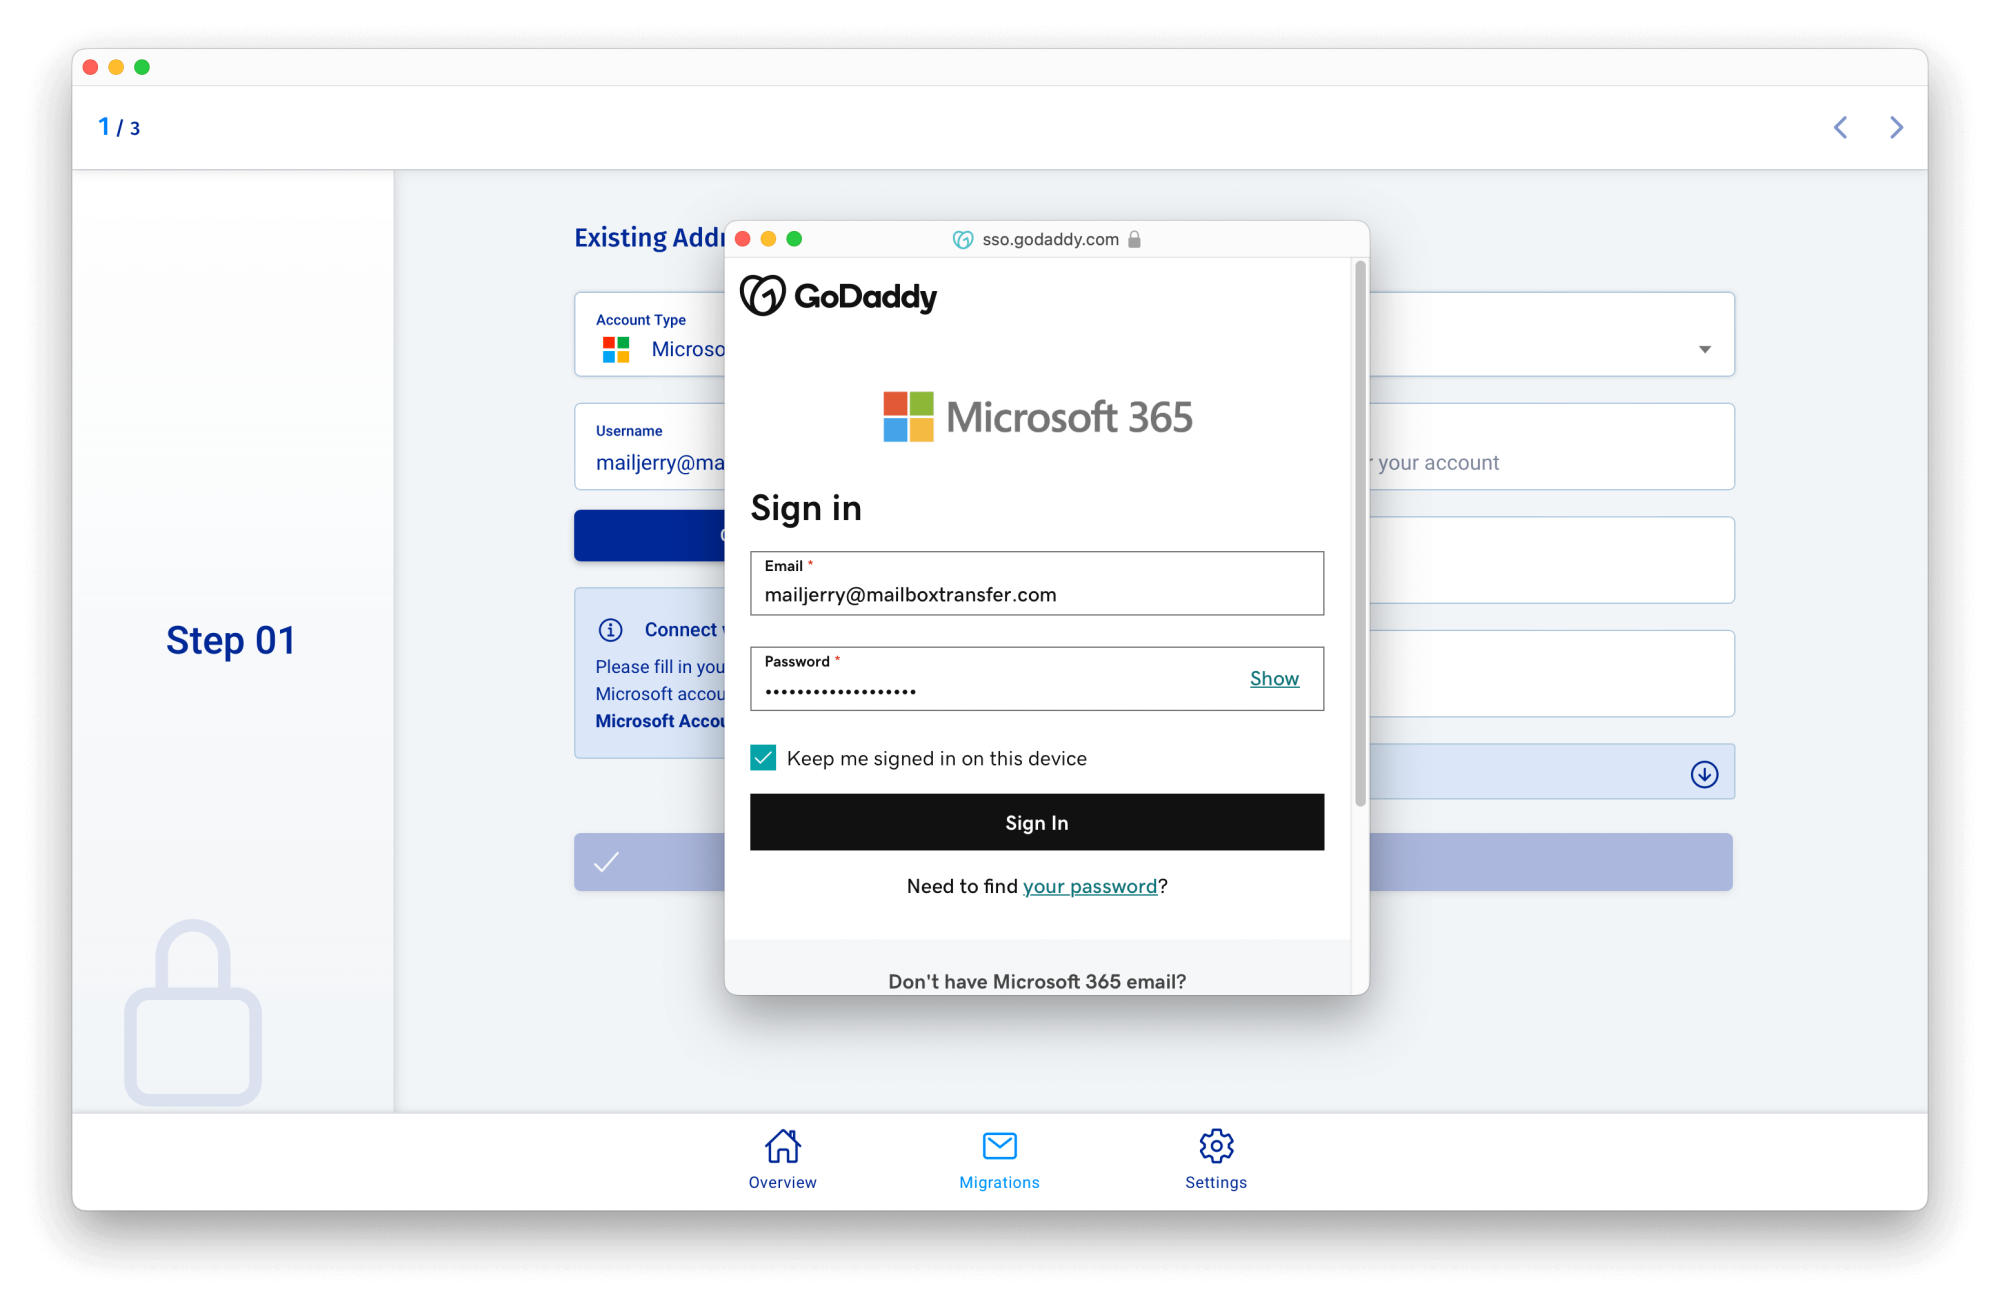 Migrate from GoDaddy to Office 365: Sign In to GoDaddy